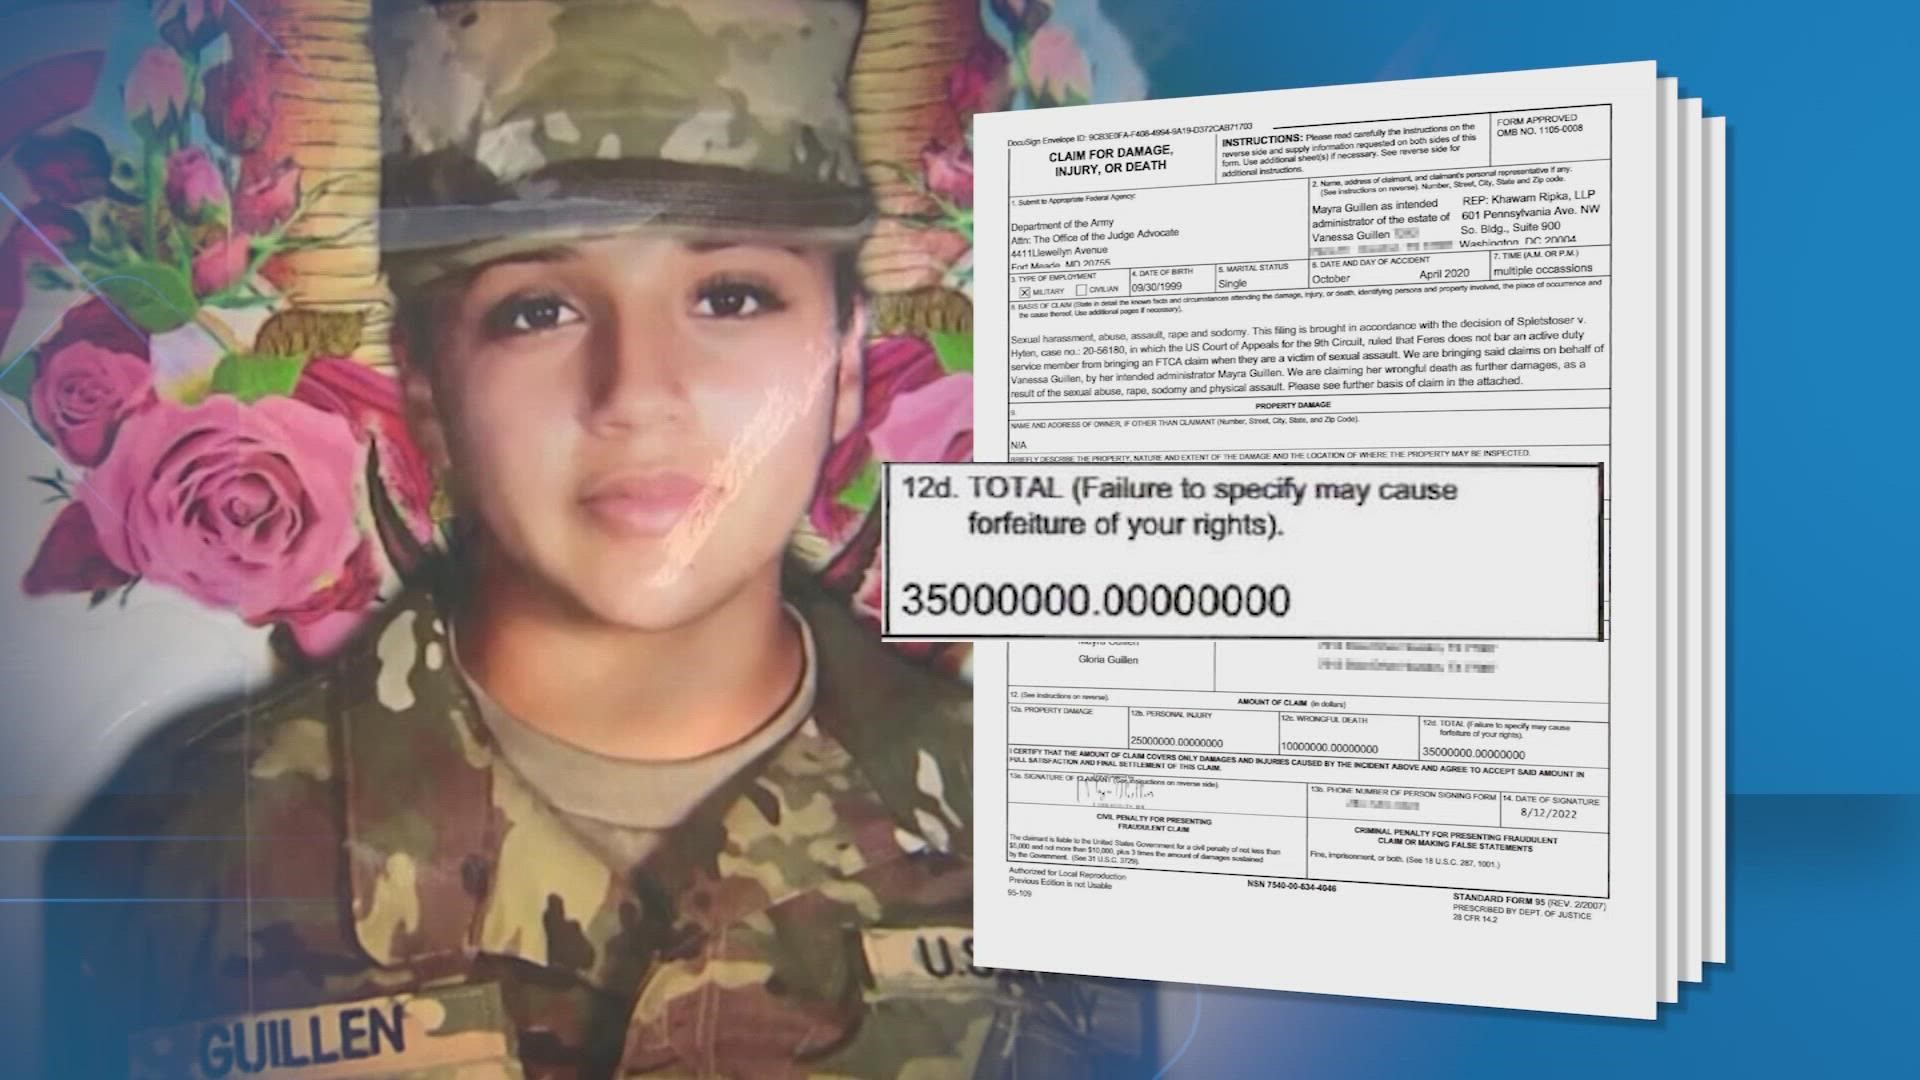 The family of Vanessa Guillen filed a $35 million dollar lawsuit Friday seeking damages from the U.S. Government.